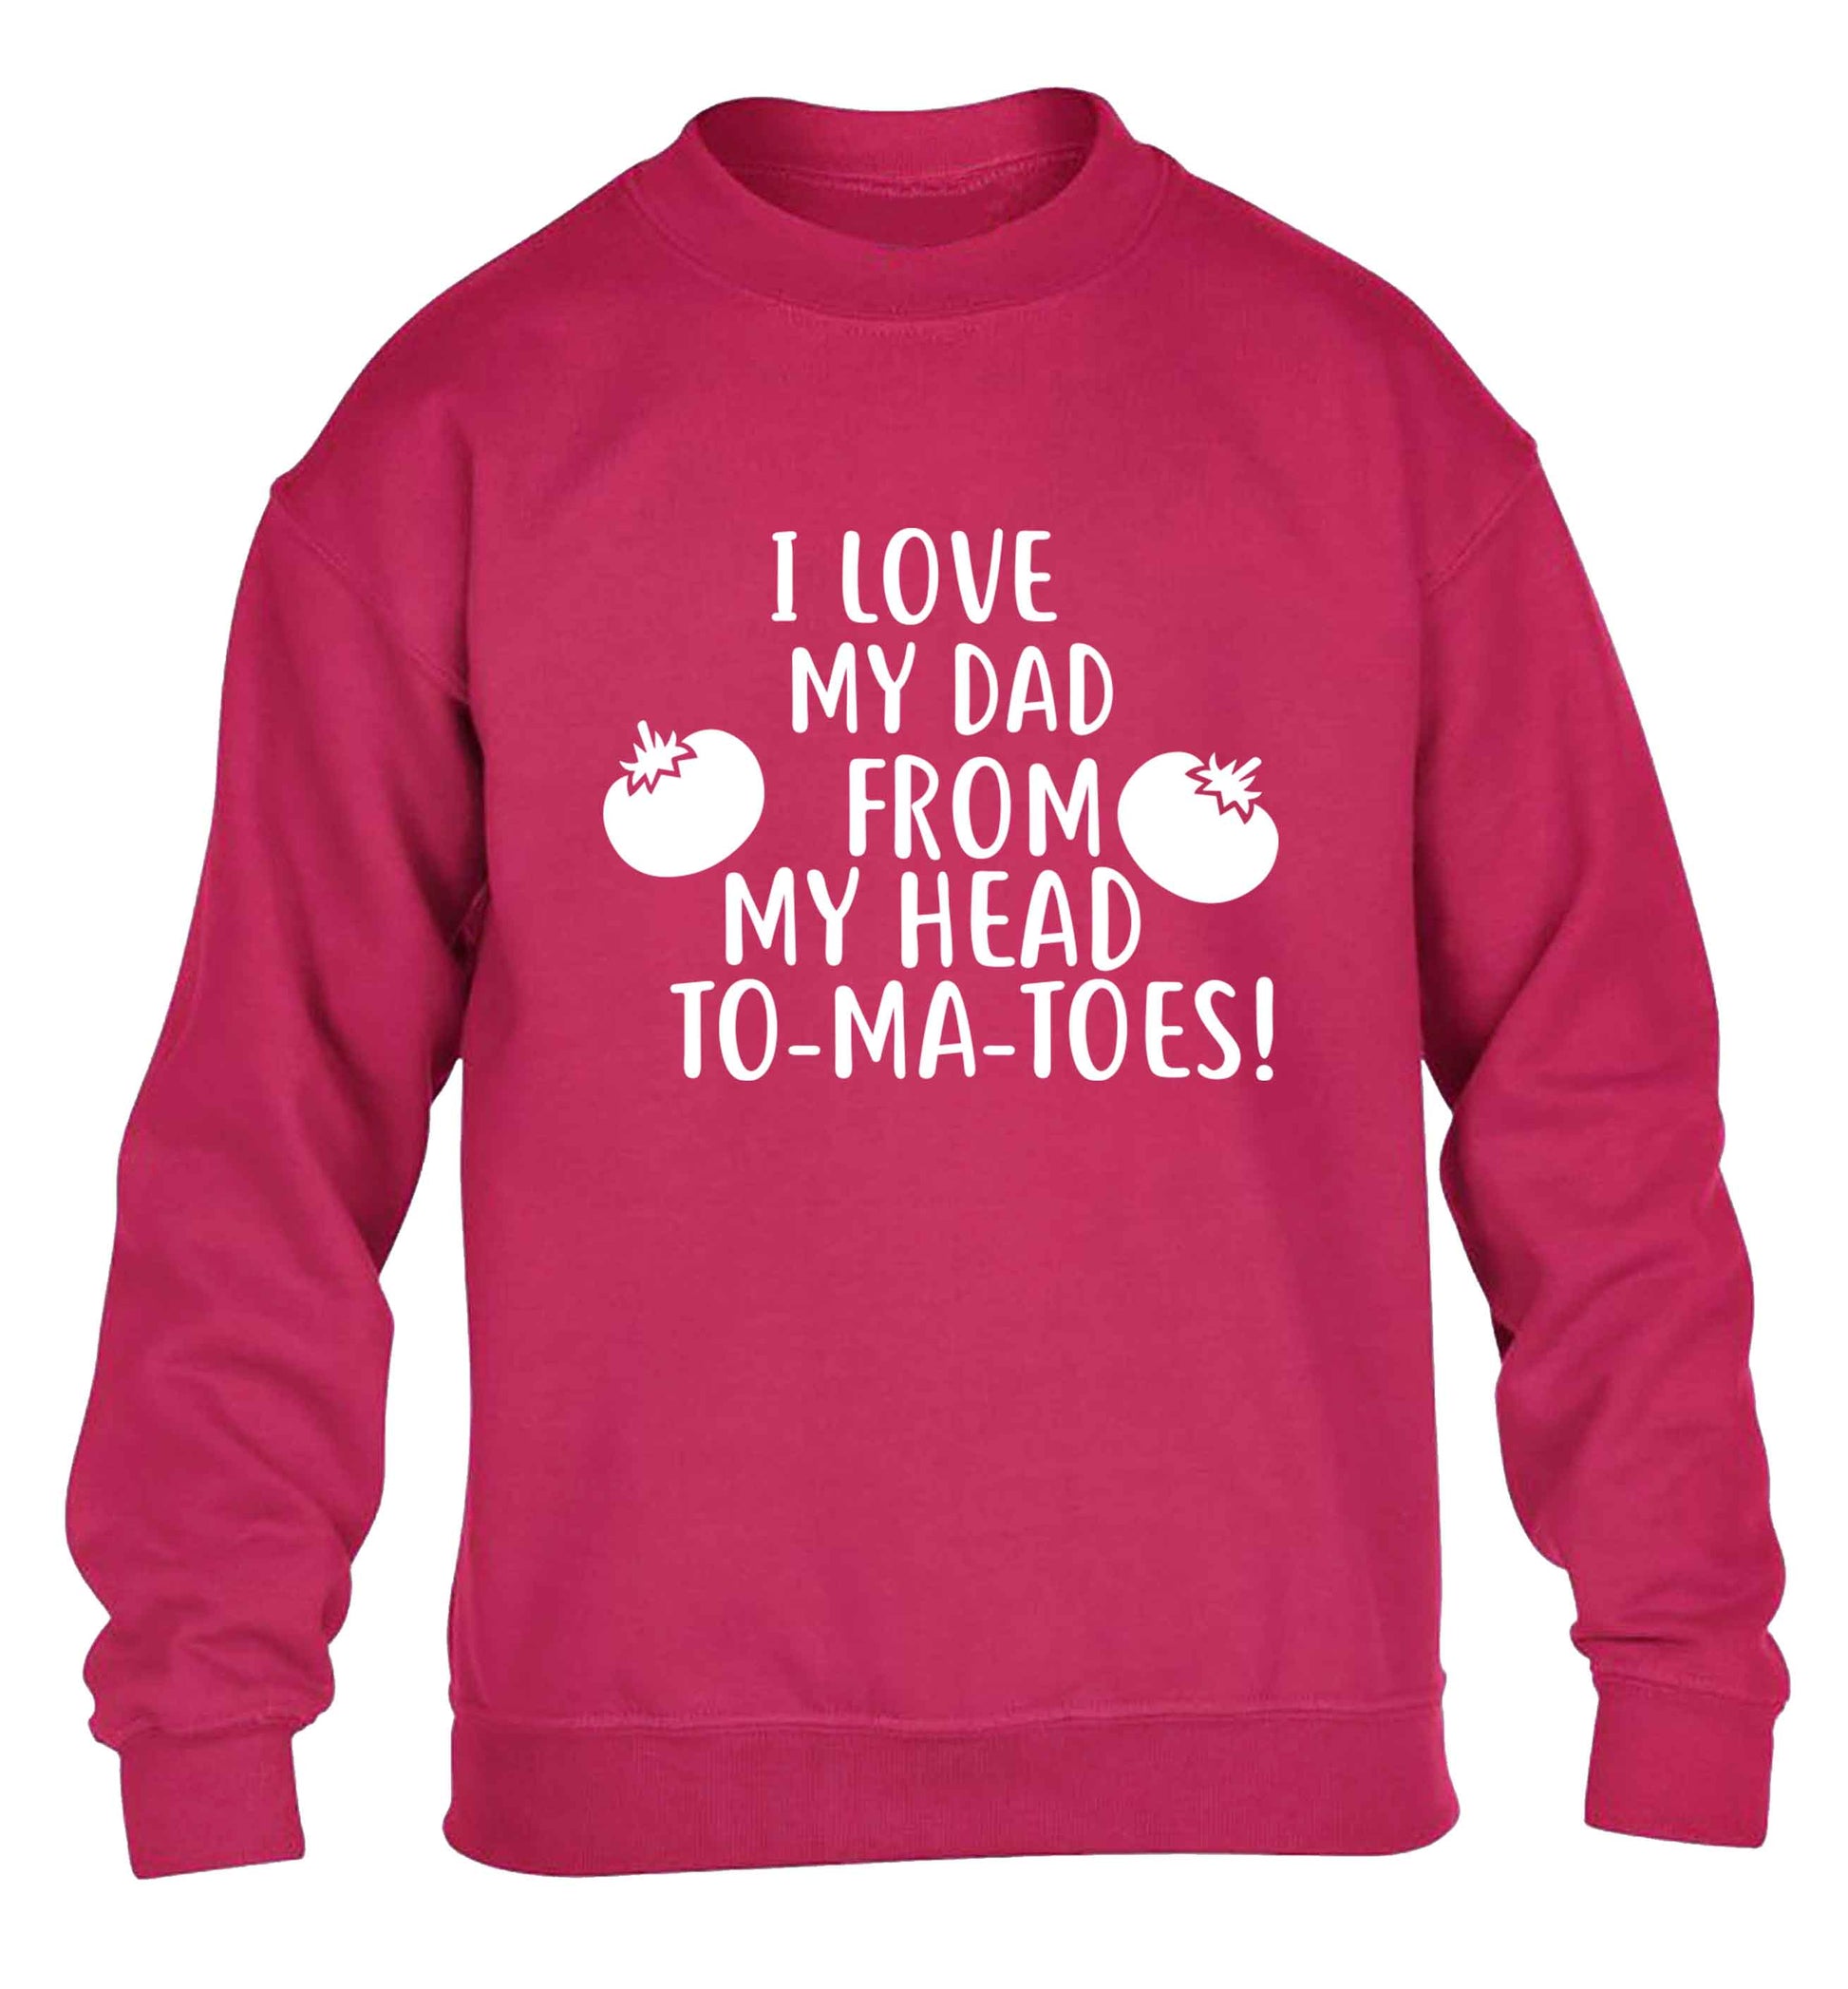 I love my dad from my head to-ma-toes children's pink sweater 12-13 Years